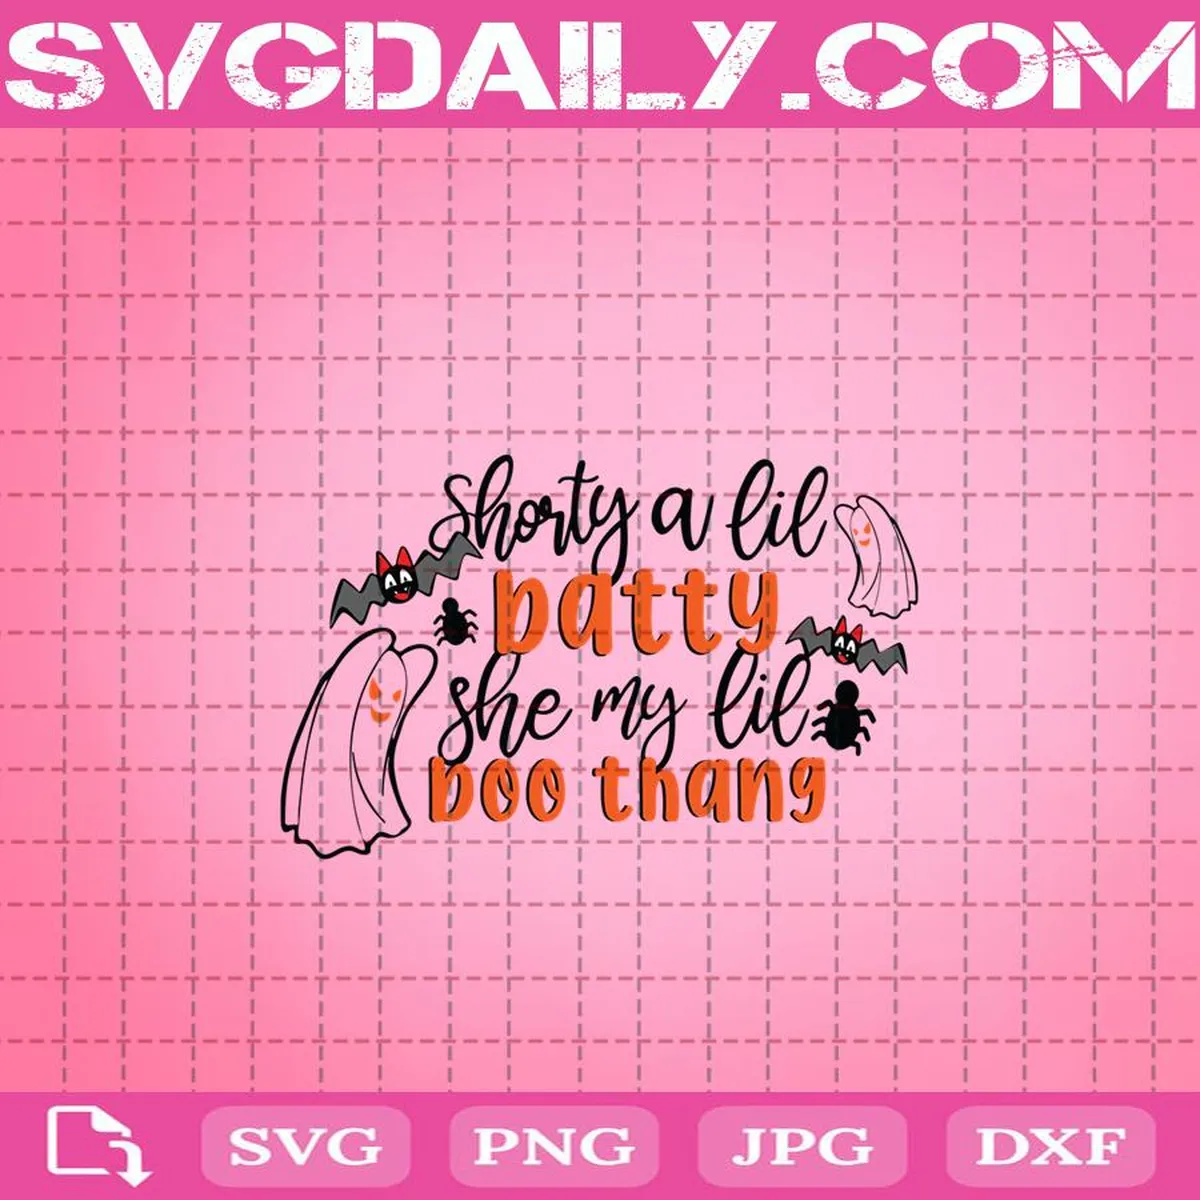 Shorty A Lil Batty She My Lil Boo Thang Svg, Boo Svg, Halloween Svg, Svg Dxf Png Eps Cutting Cut File Silhouette Cricut